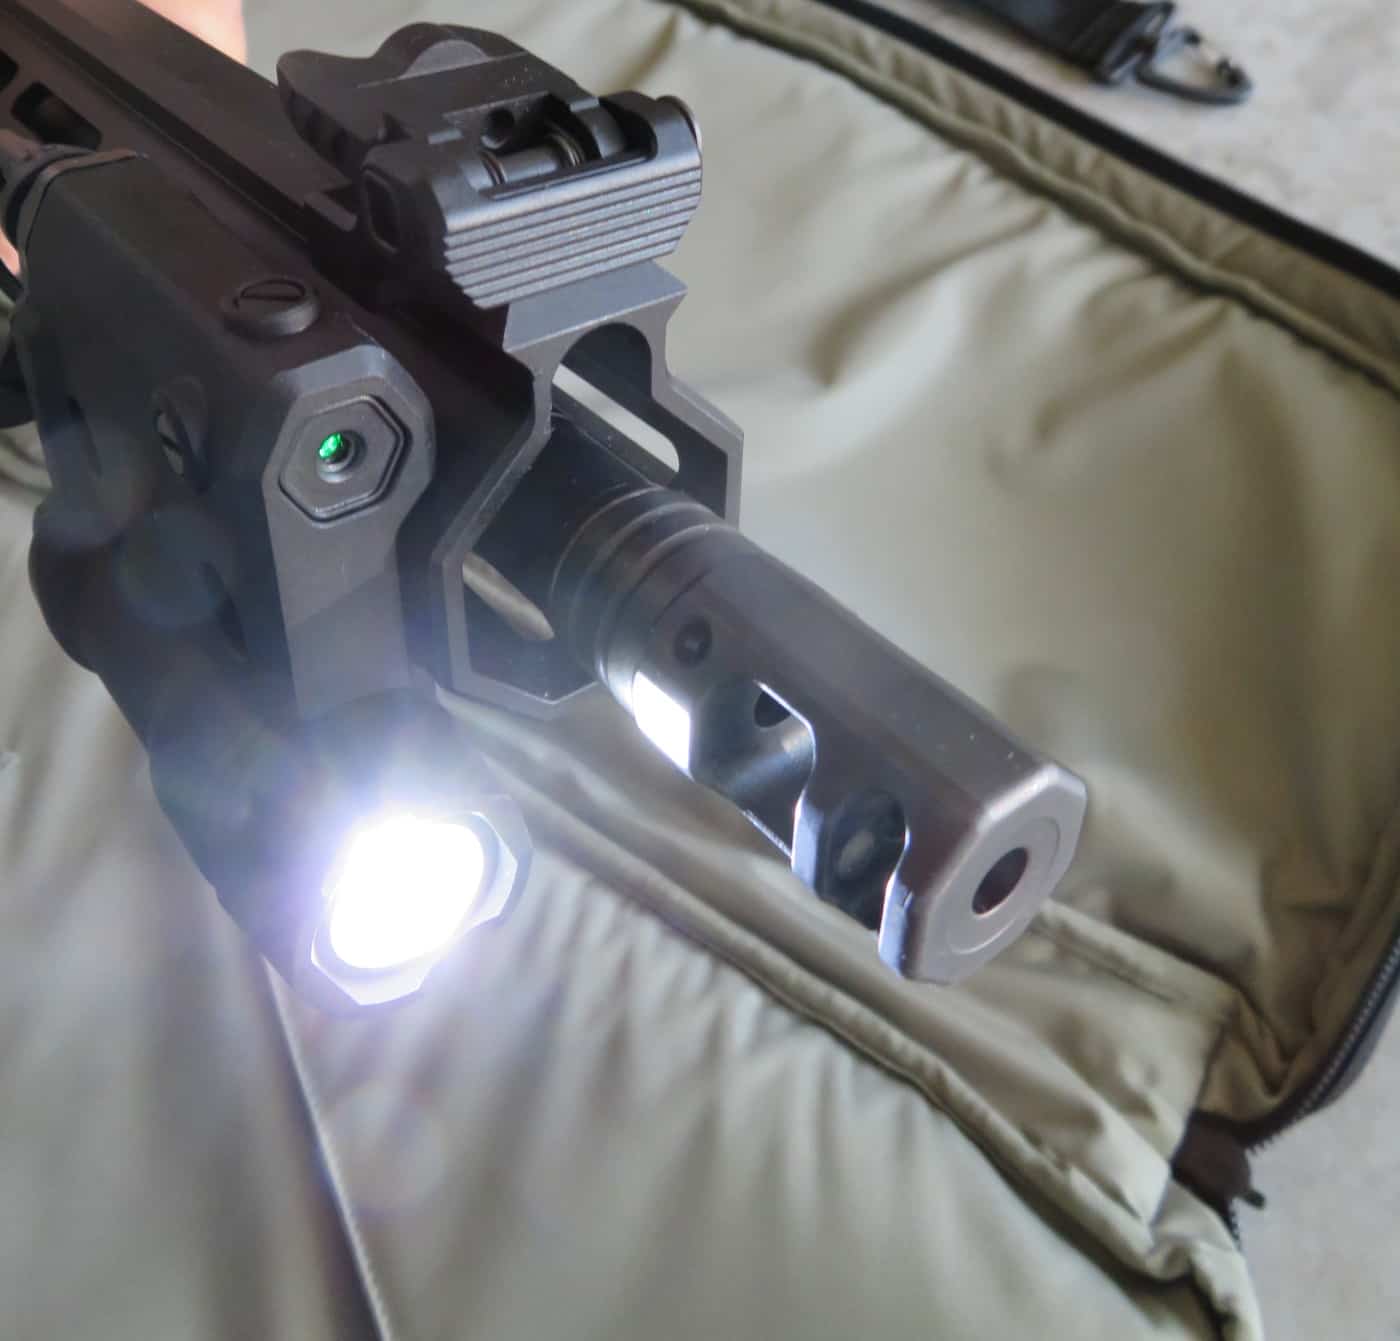 where to mount a white light on an ar